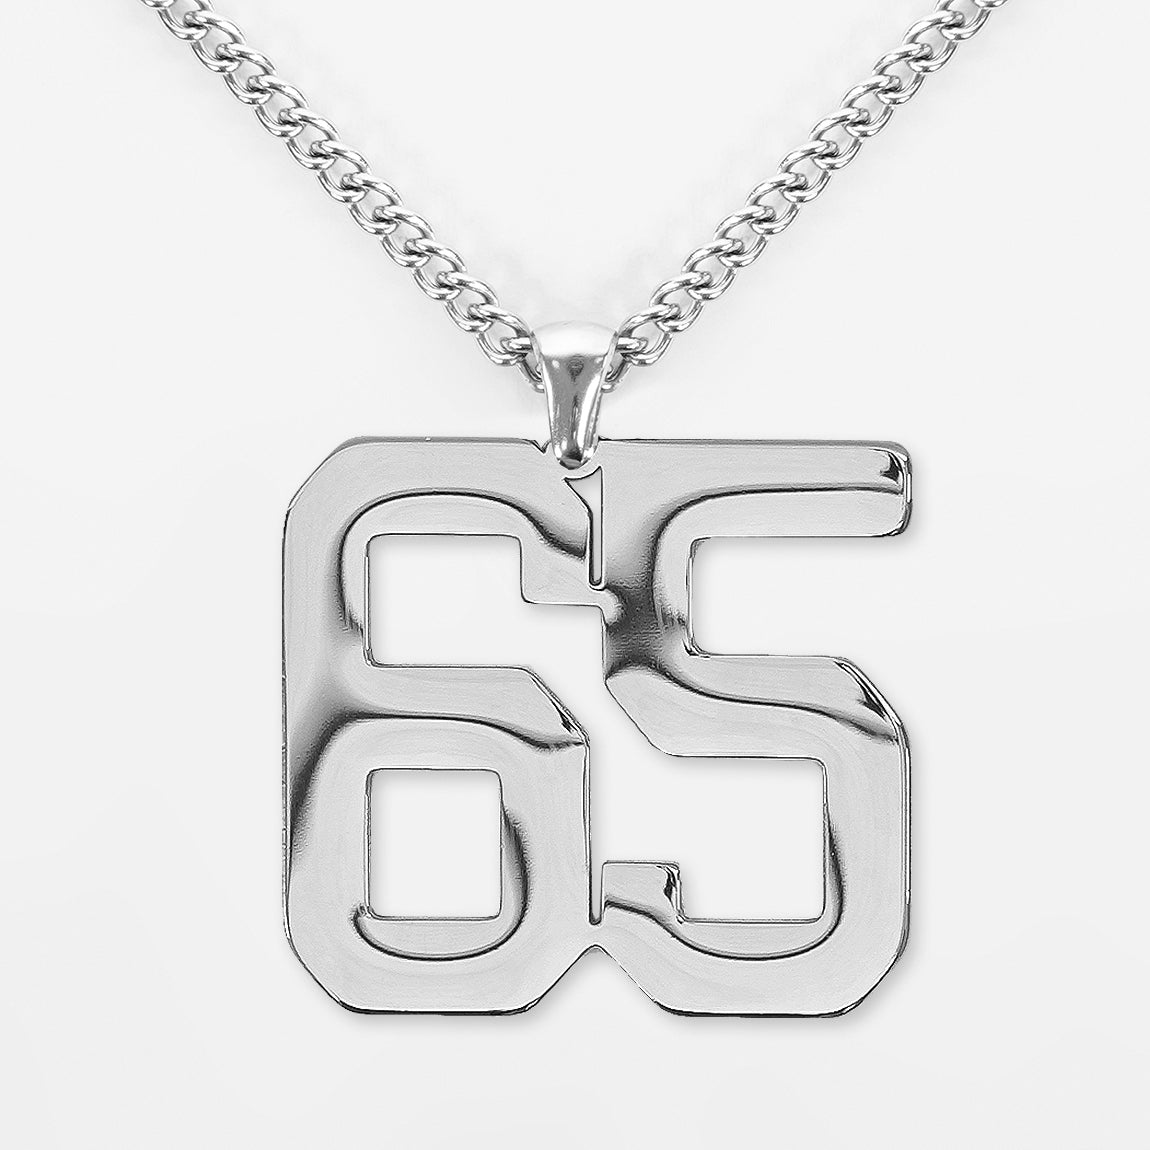 65 Number Pendant with Chain Necklace - Stainless Steel